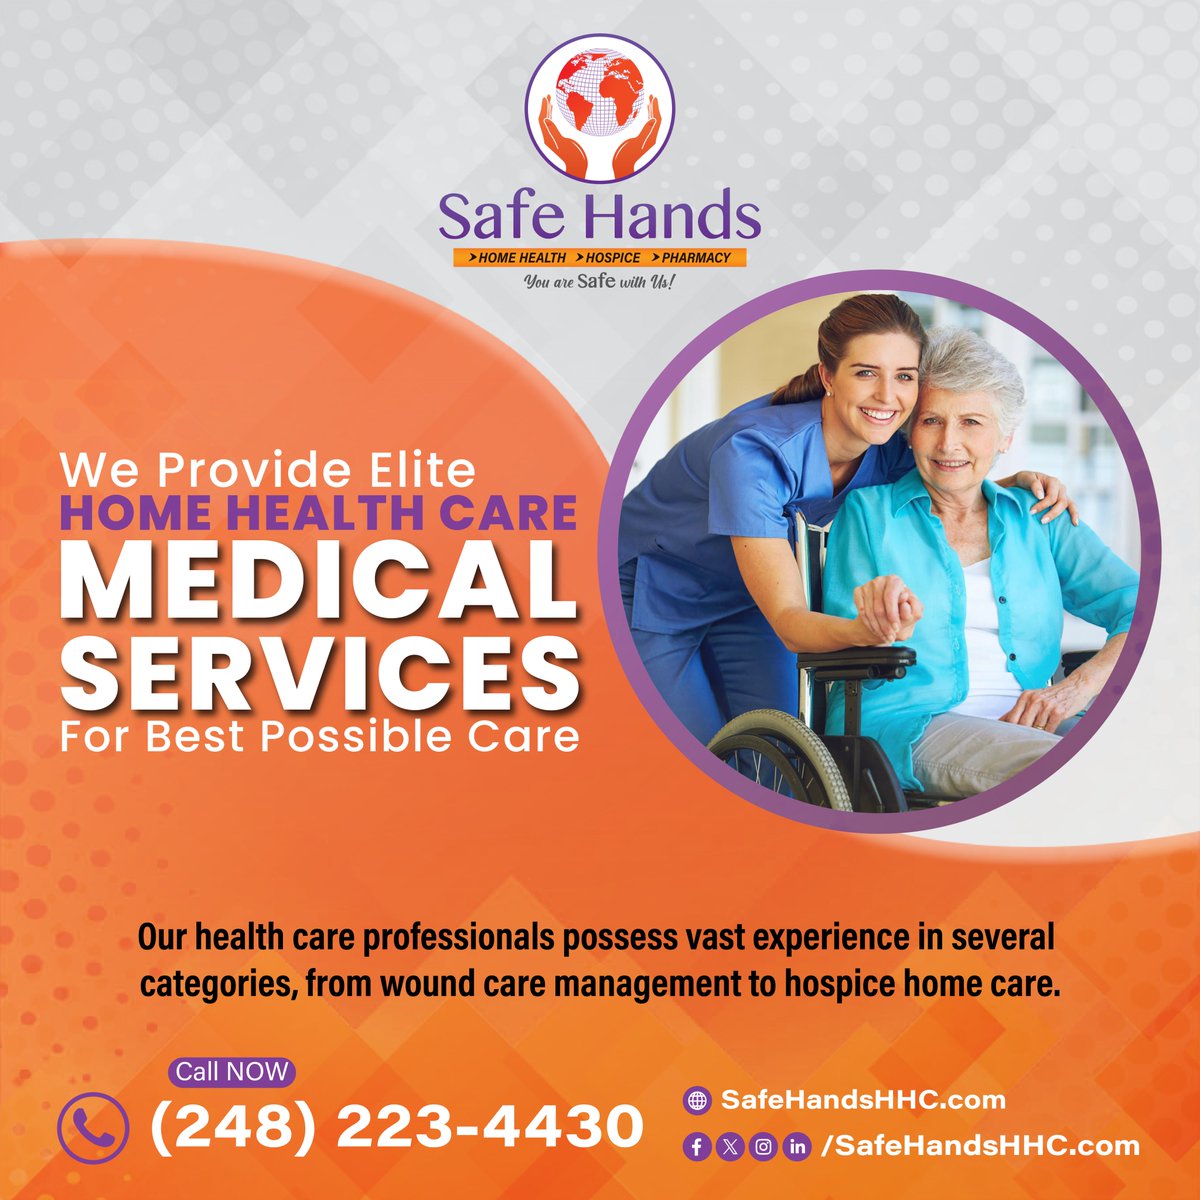 Ensuring your loved ones receive the highest standard of care from the comfort of home. 

Feel free to contact us now: +1 (248) 223-4430
or
Visit us: safehandshhc.com

#HomeHealthCare #EliteCare #SafeHands #HealthAtHome #CompassionateCare #SeniorWellness #QualityHomeCare